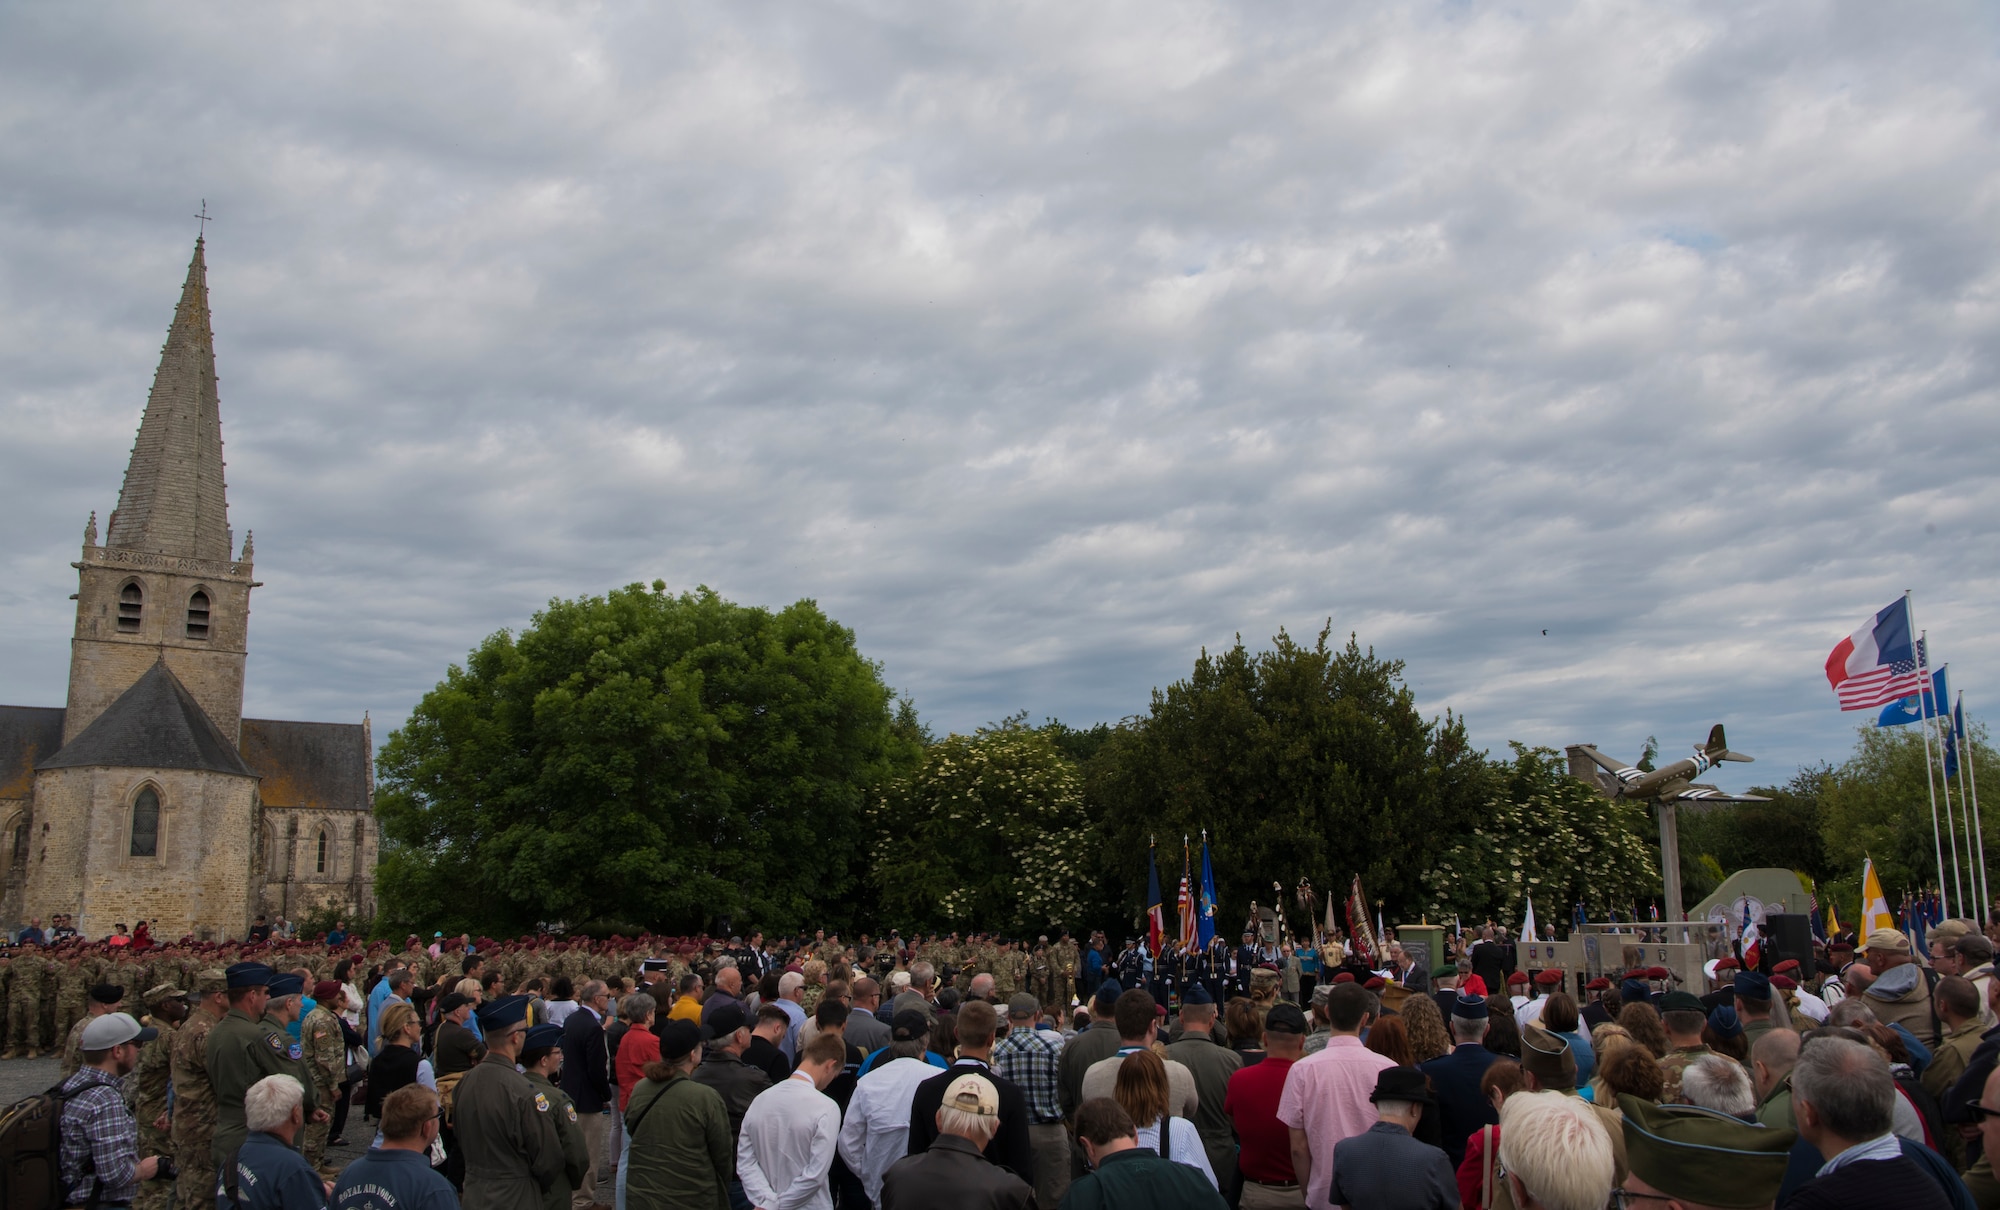 Hundreds of guests and active duty service members from the United States and Germany gather around the U.S. Air Force monument near the Eglise Saint-Candide de Picauville church for a ceremony honoring all airborne troops and flight crew that served on D-Day in Picauville, France, June 4, 2019. The ceremony was one of 55 ceremonies held between June 1 - 9 in honor of the 75th anniversary of D-Day. (U.S. Air Force photo by Senior Airman Kristof J. Rixmann)